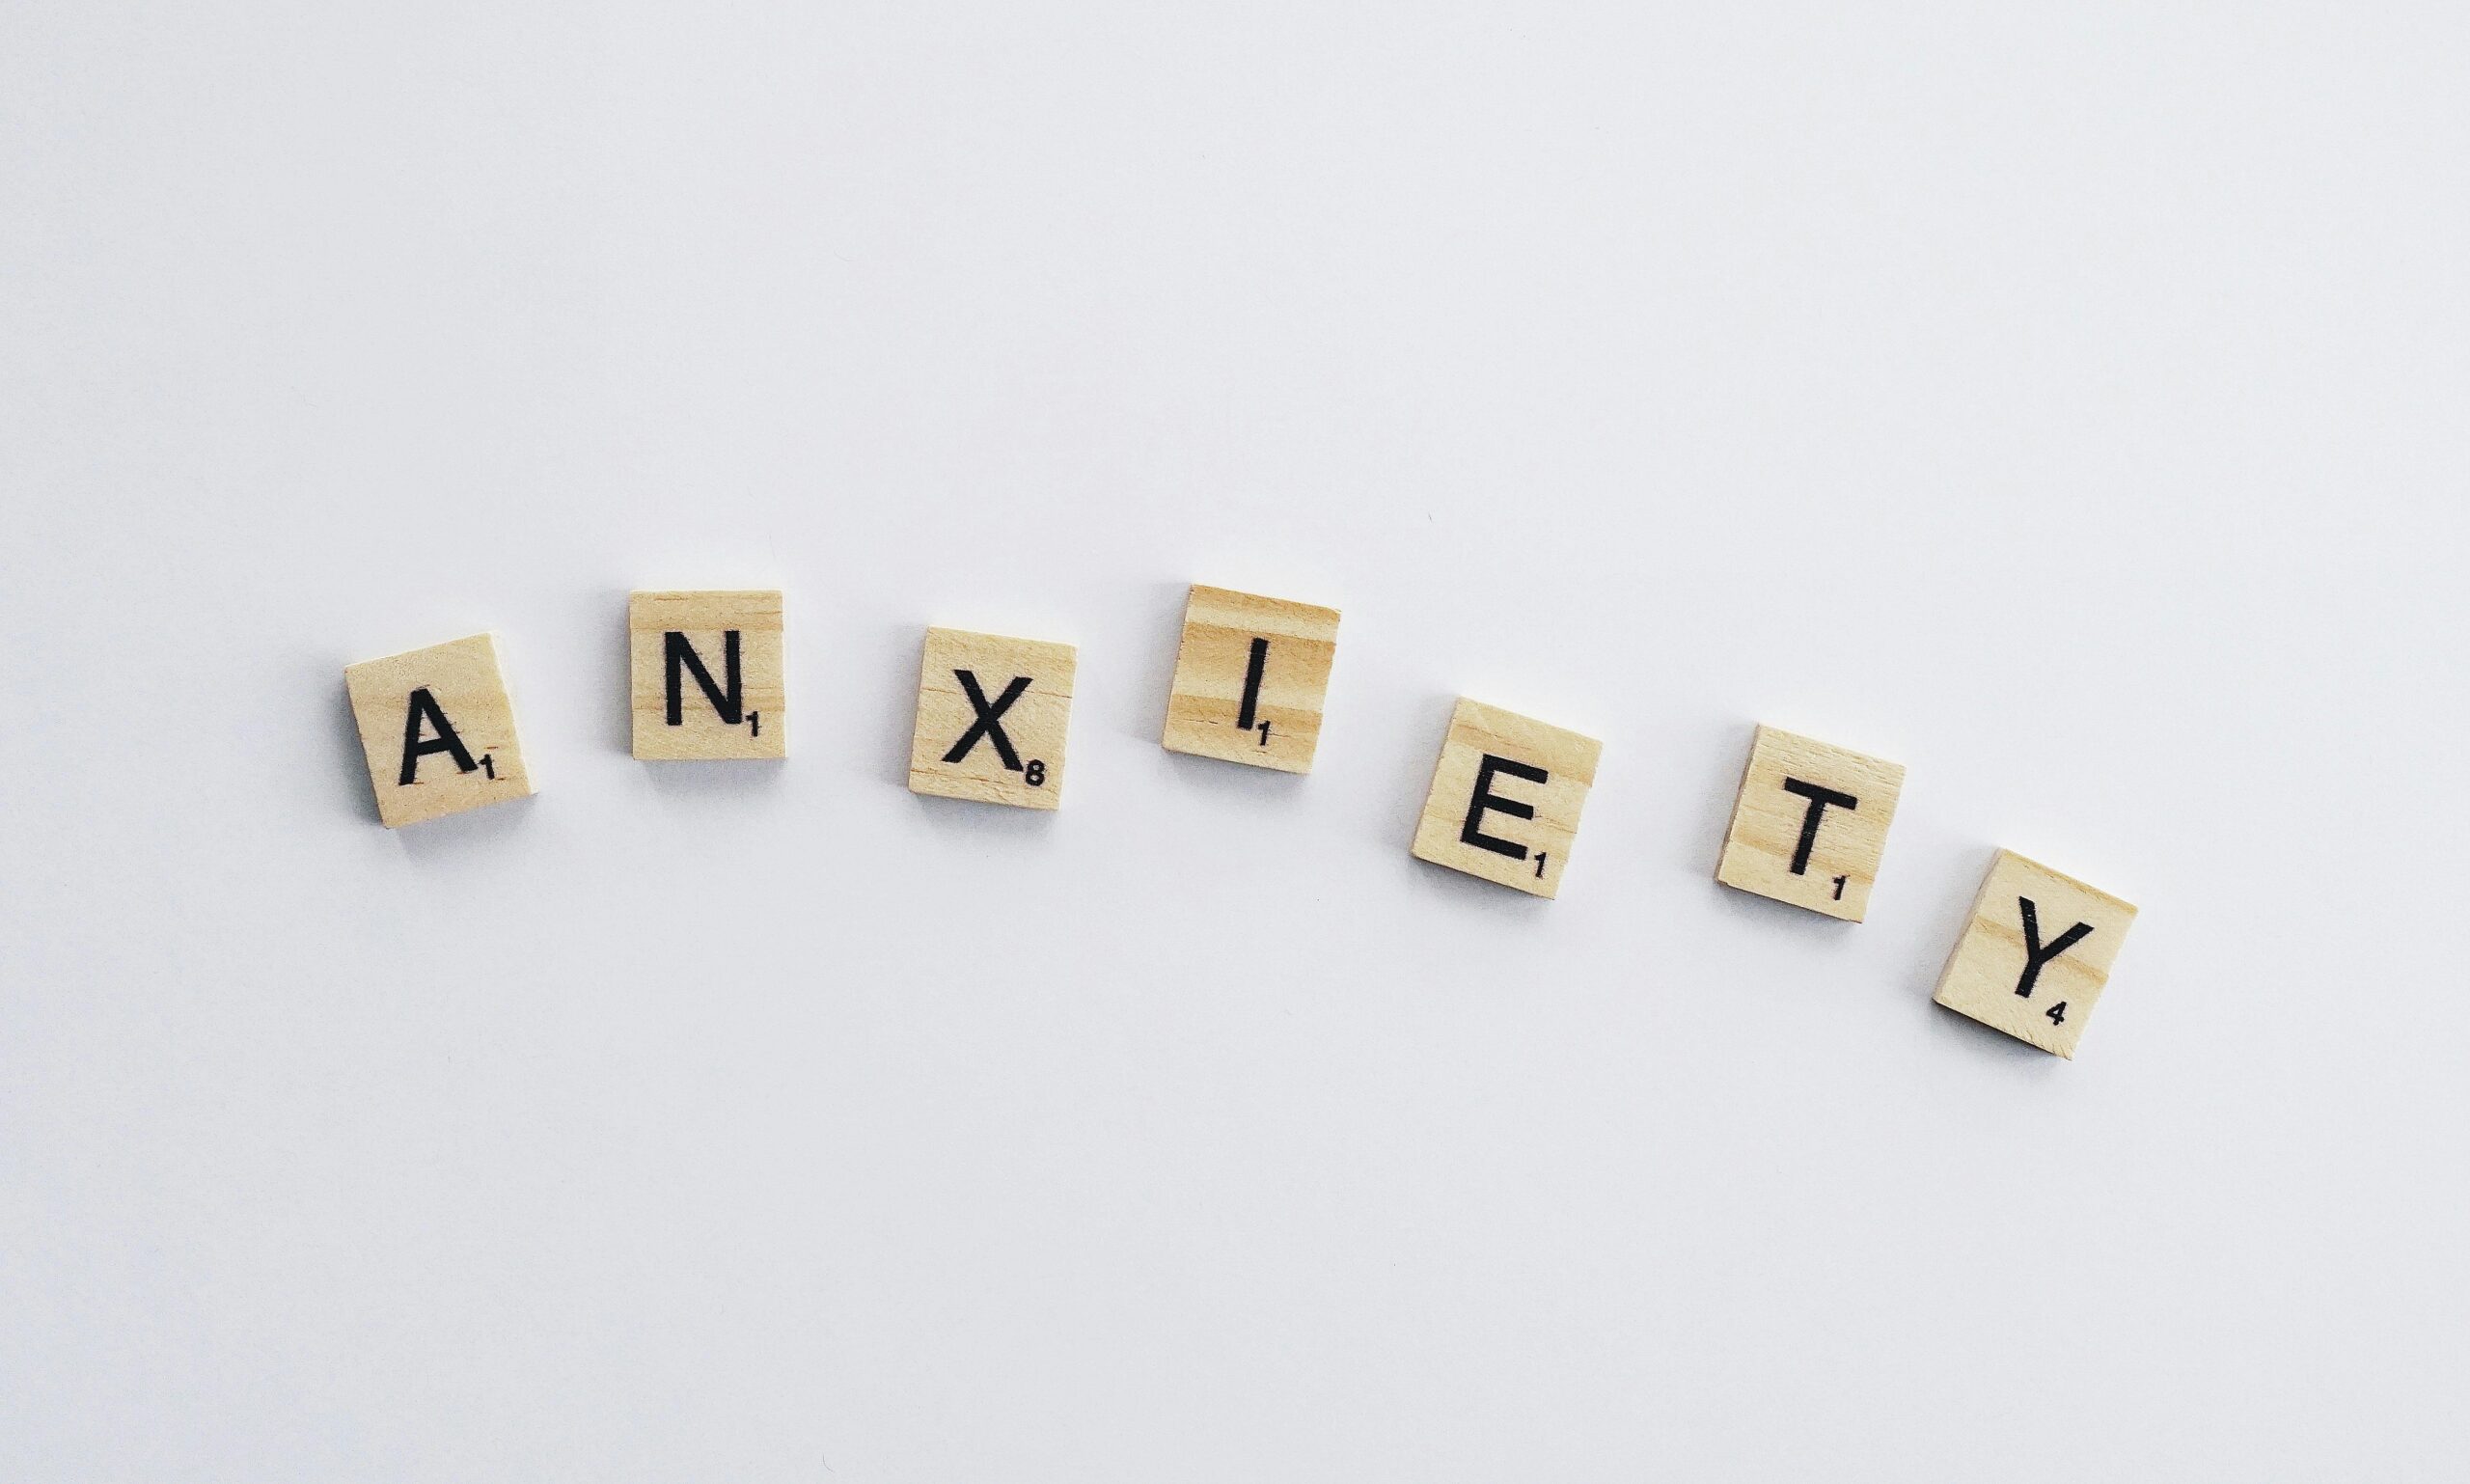 Scrabble letters that spell out anxiety